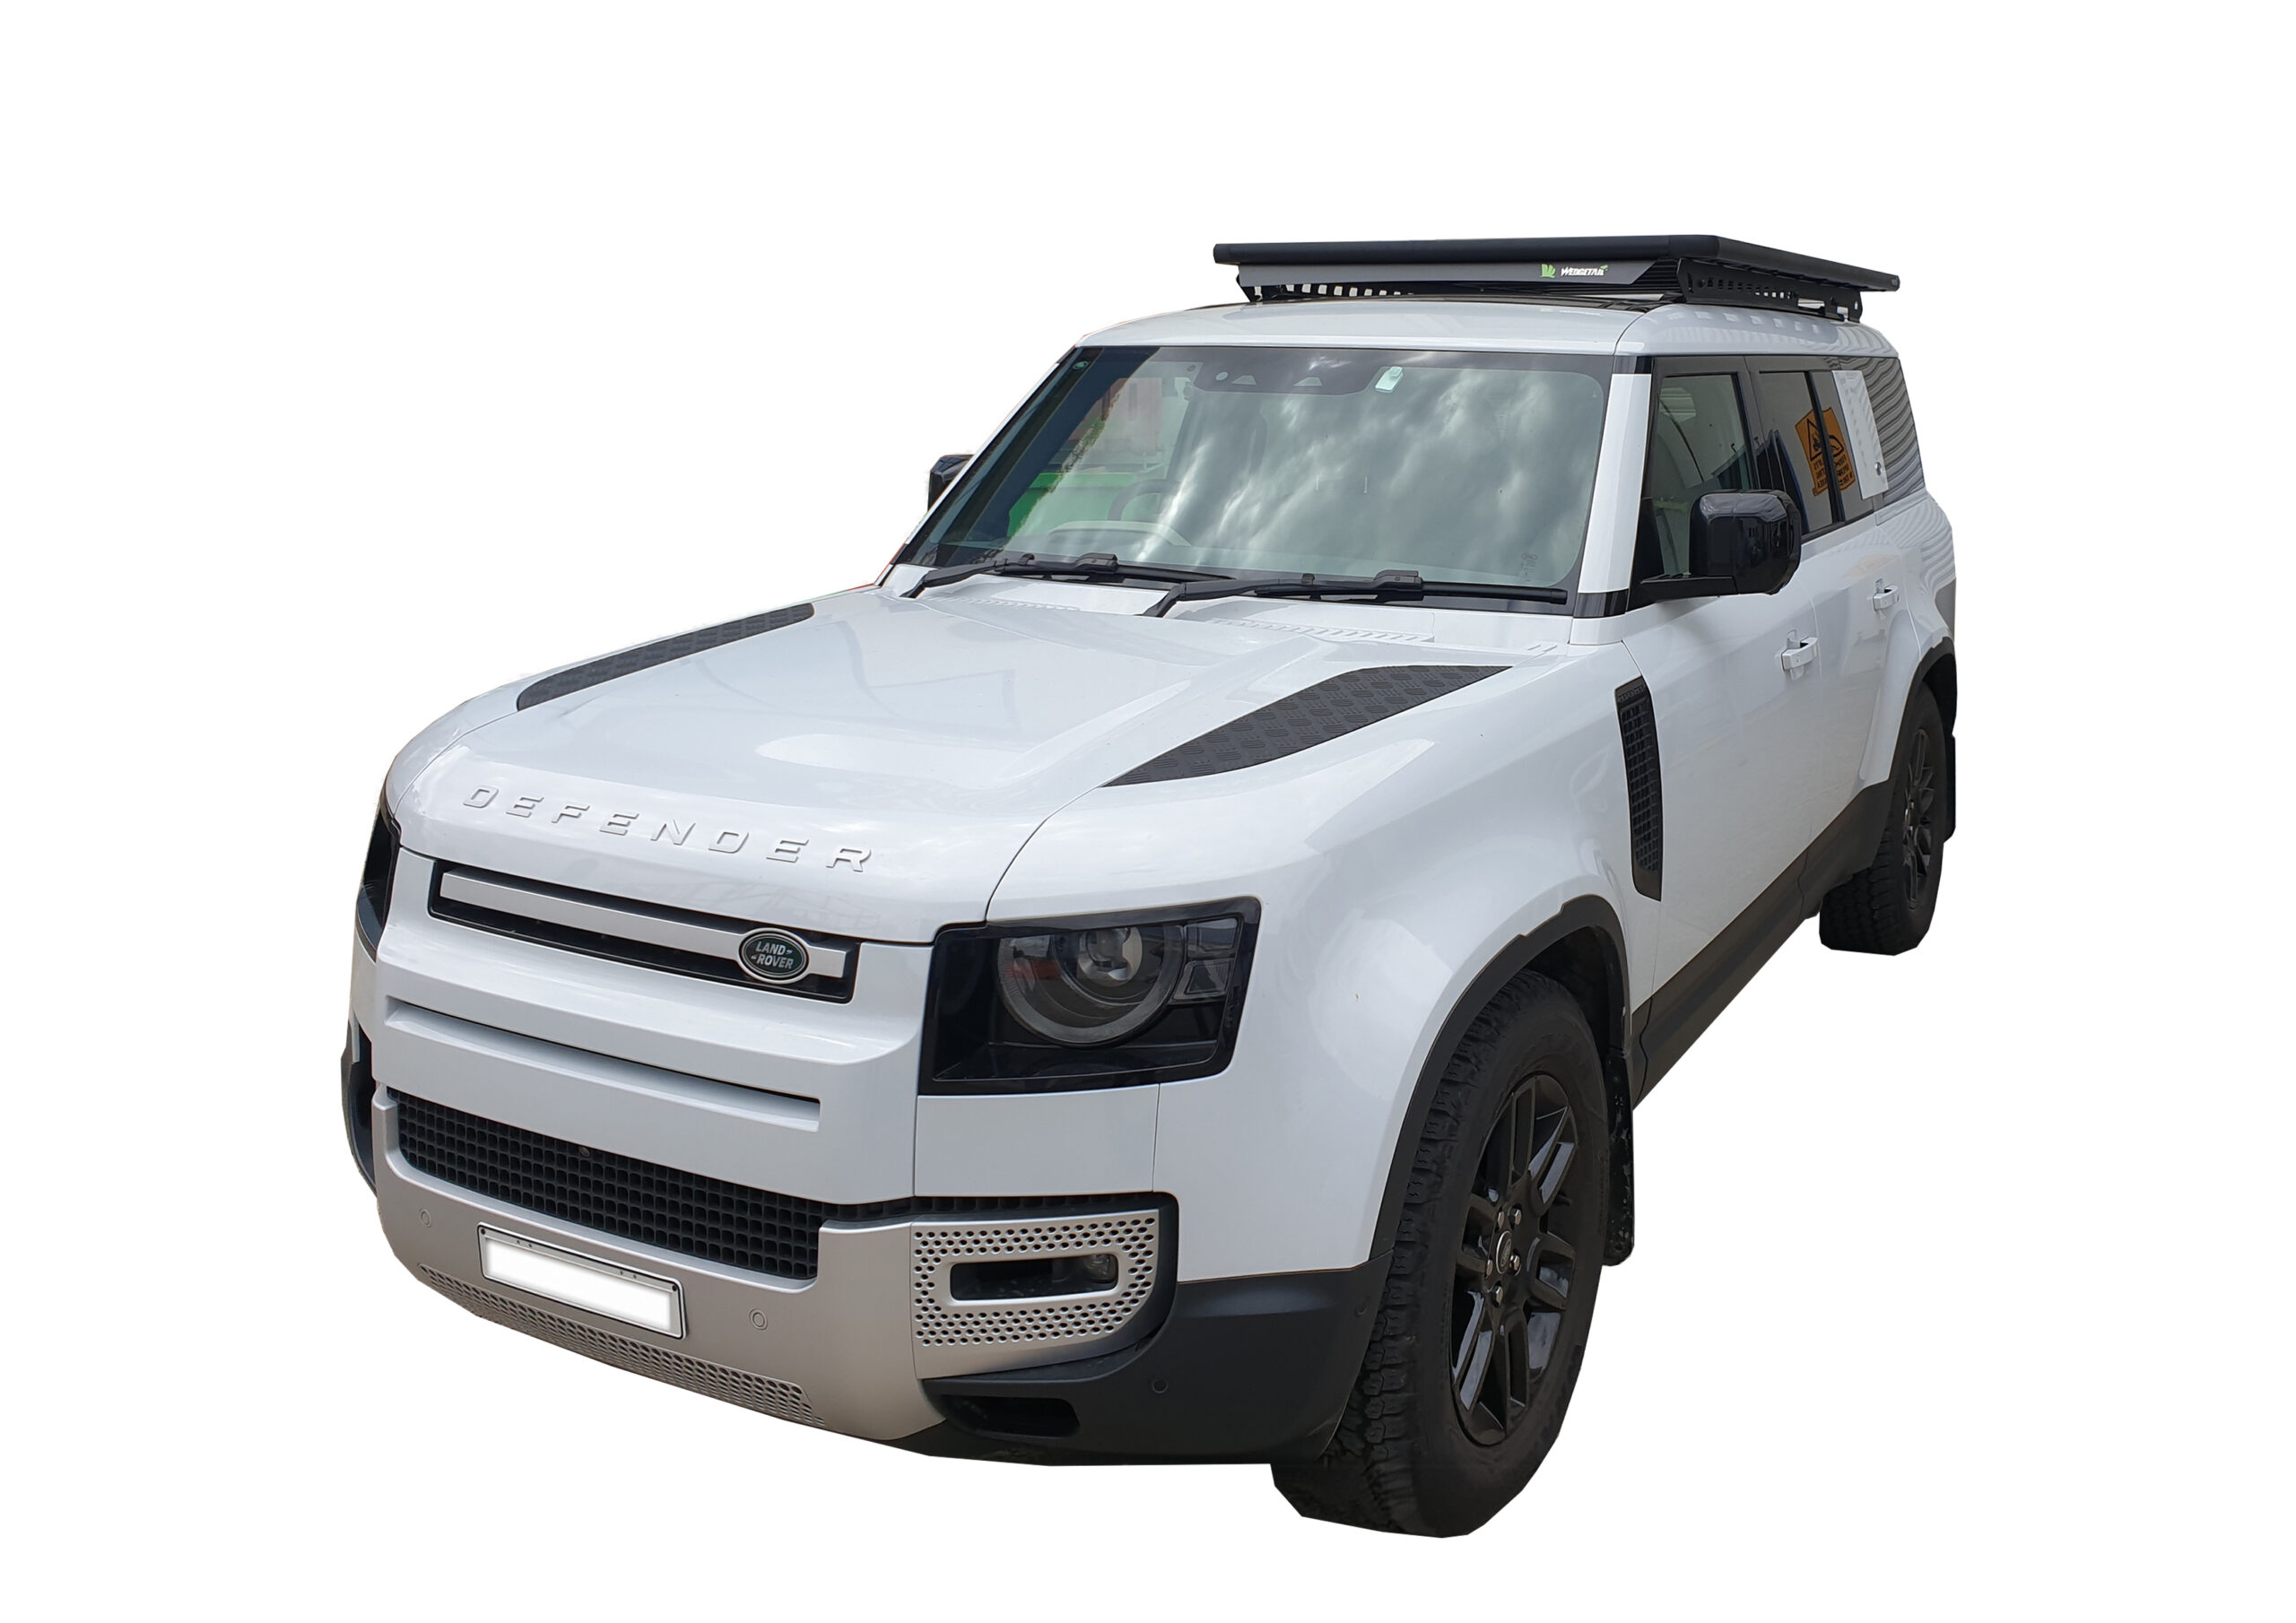 Land Rover Defender 130 fitted with a Wedgetail platform roof rack. Hero image.